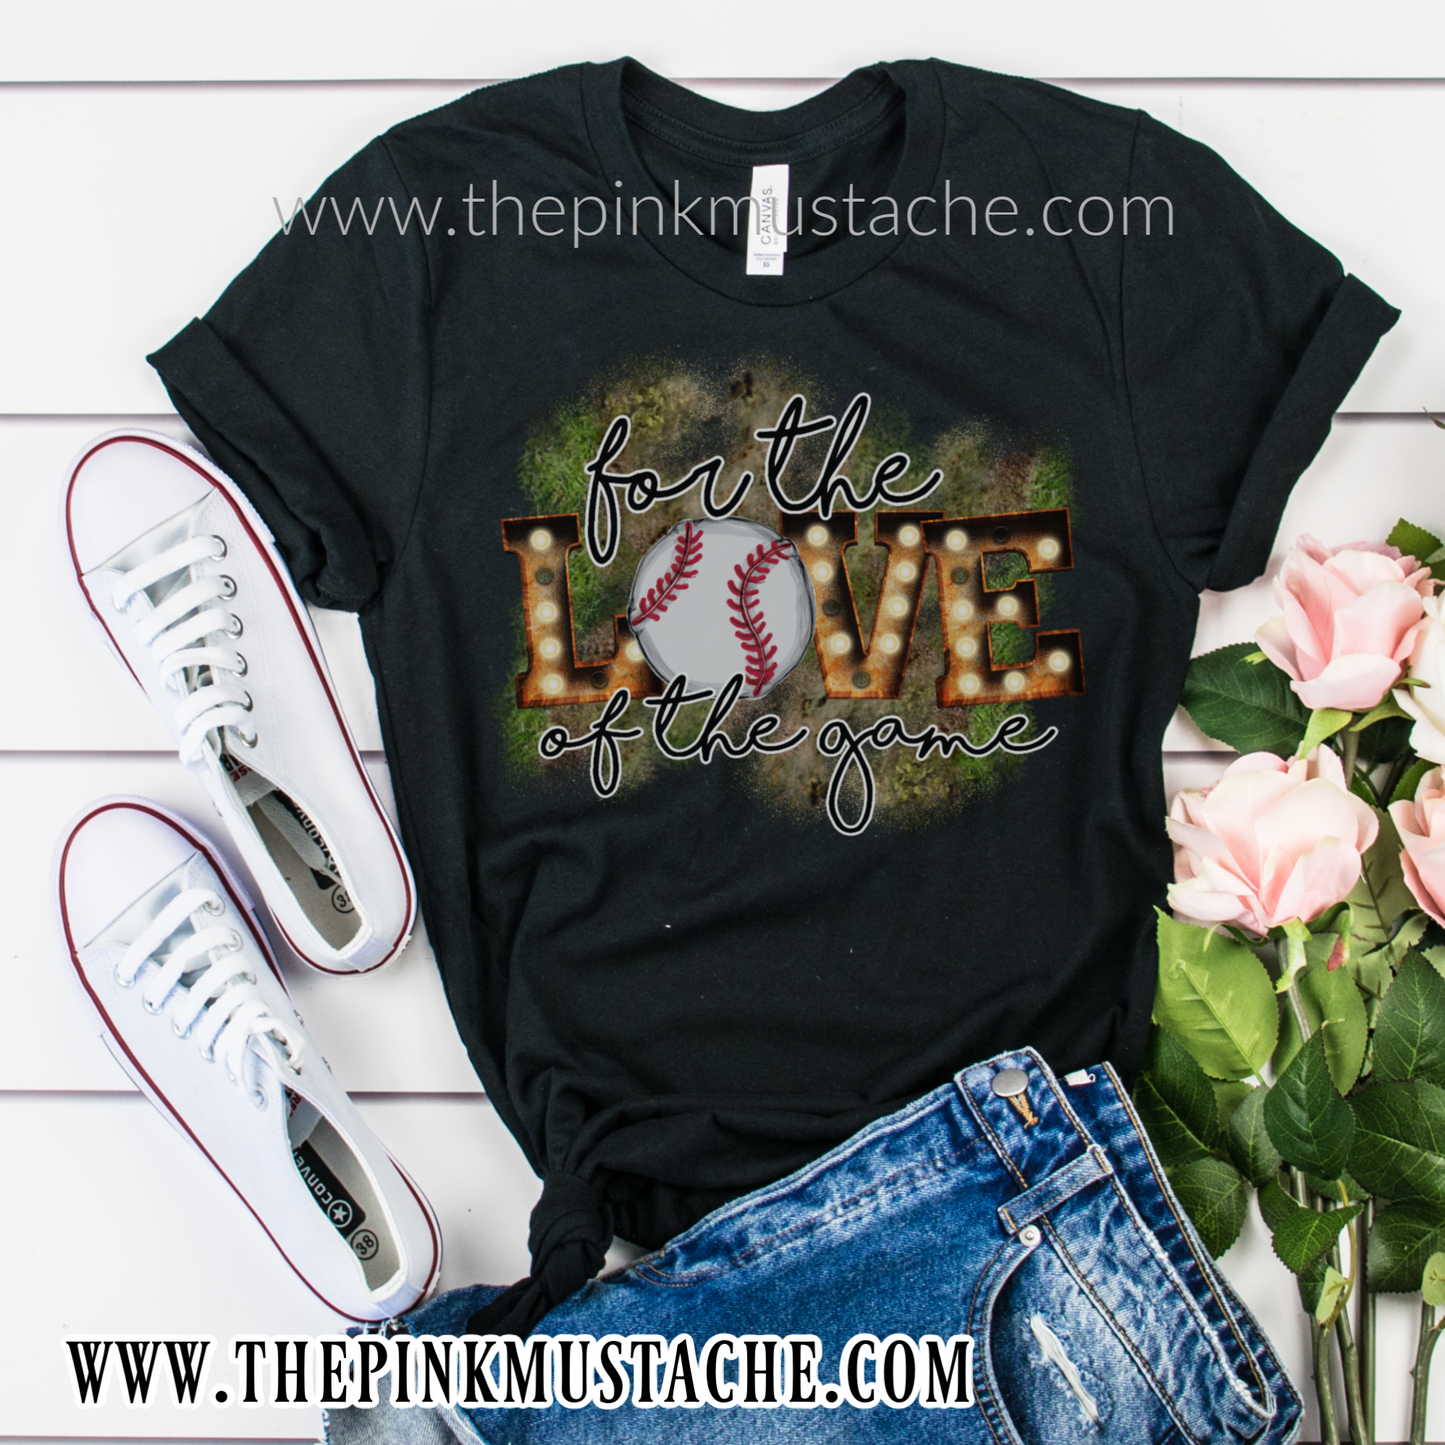 Baseball For The Love Of The Game T-Shirt / Baseball Mom Marquee Tee/ T-Ball Shirt/ Gifts For Her/ SALE / Baseball Fan T-Shirt